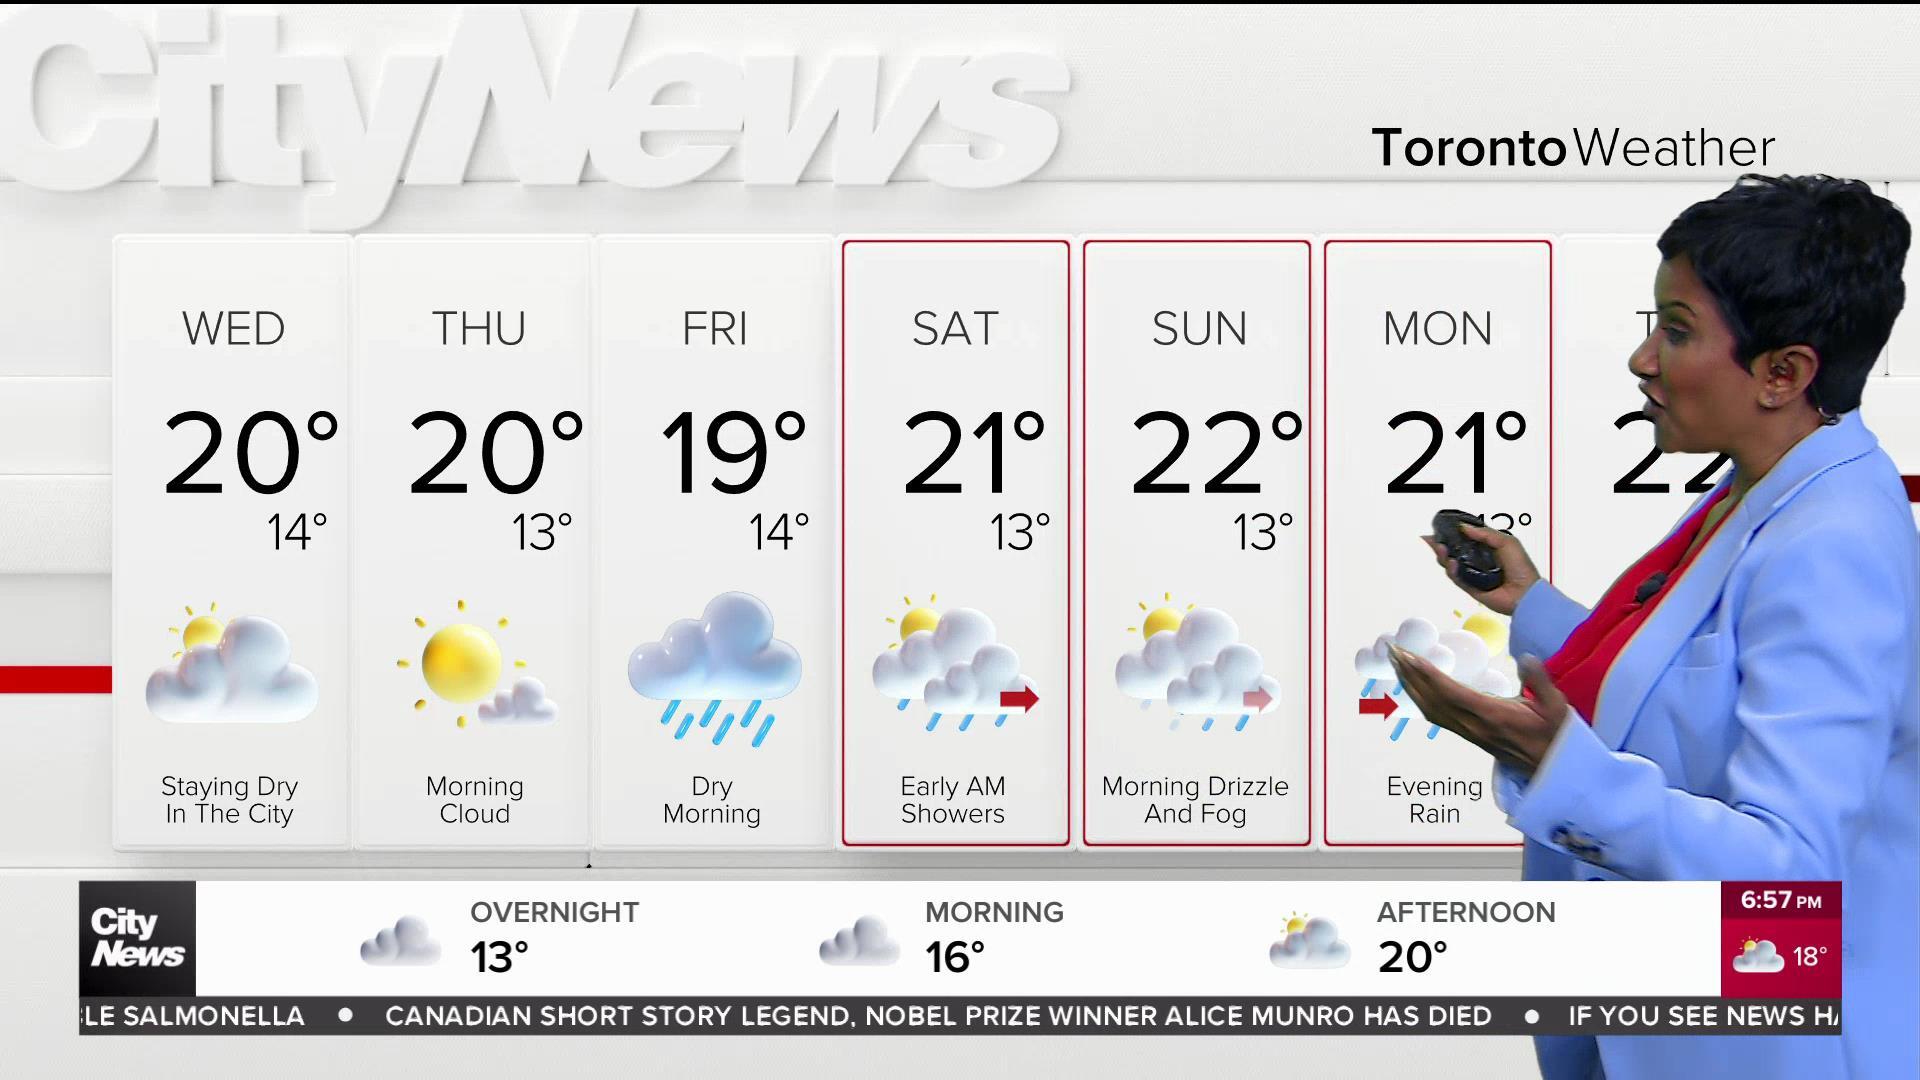 Warm but rainy end to the week in Toronto